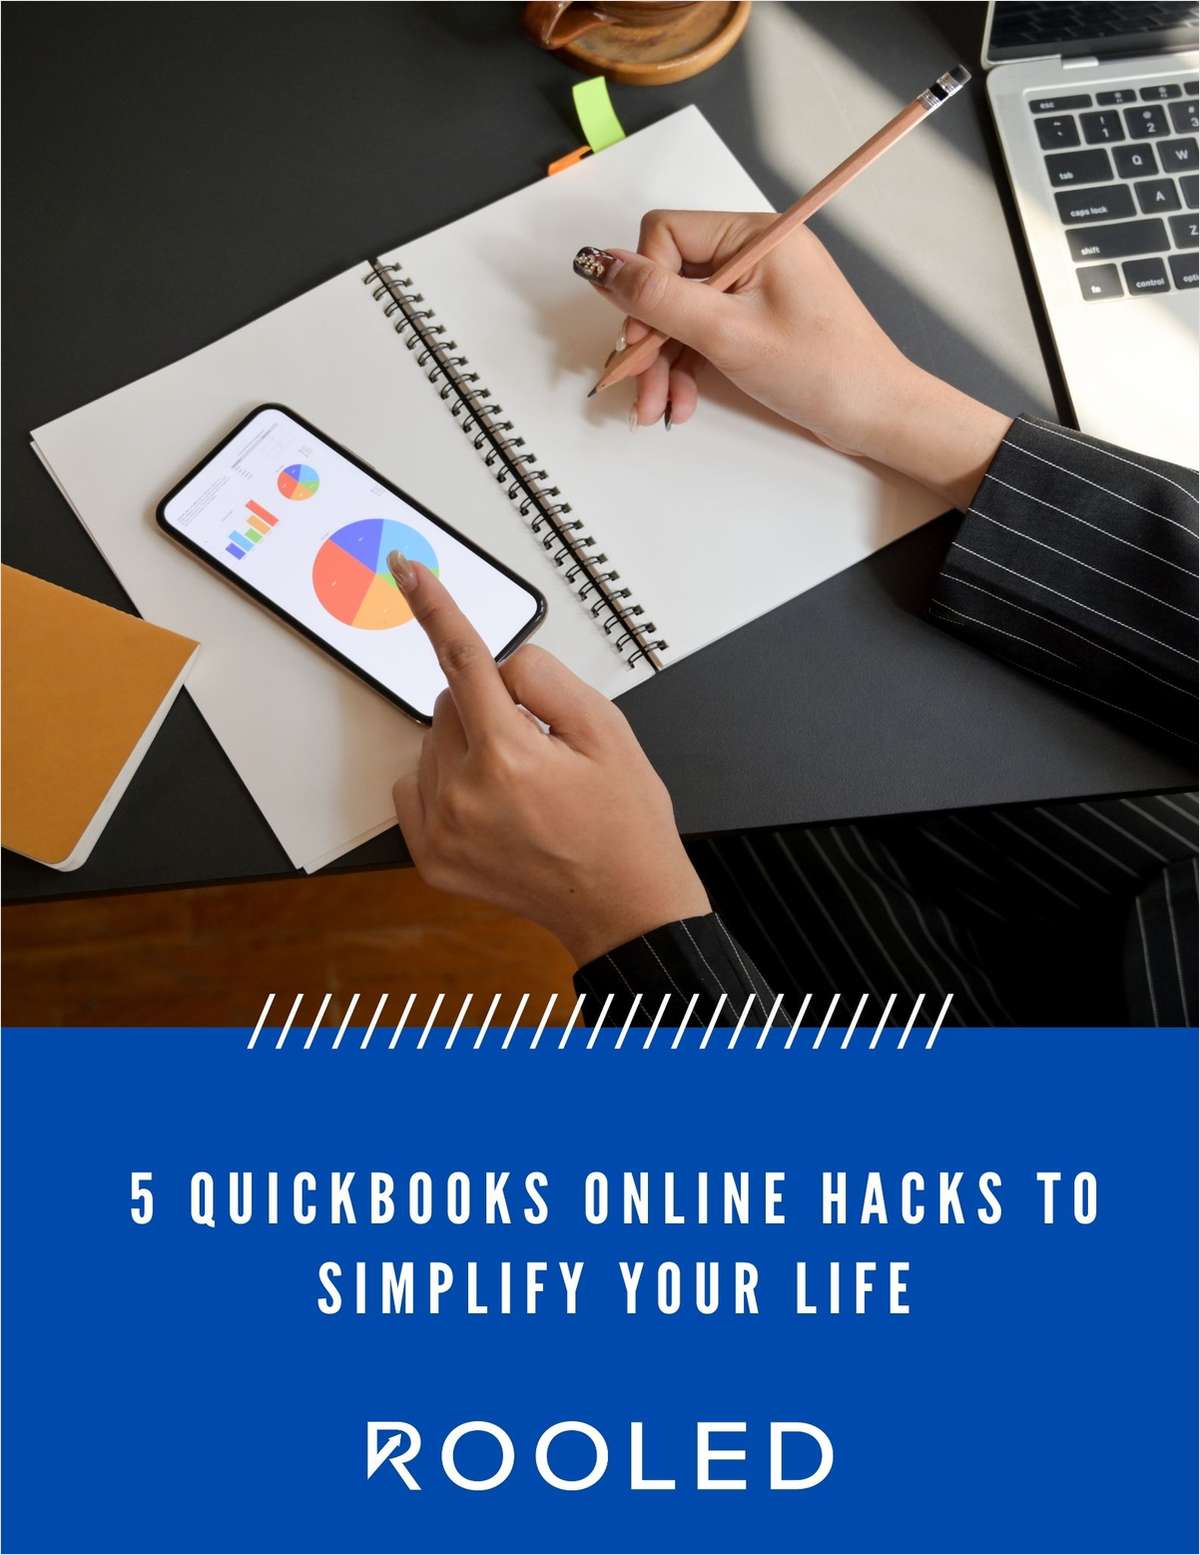 5 QuickBooks Online Hacks to Simplify Your Life